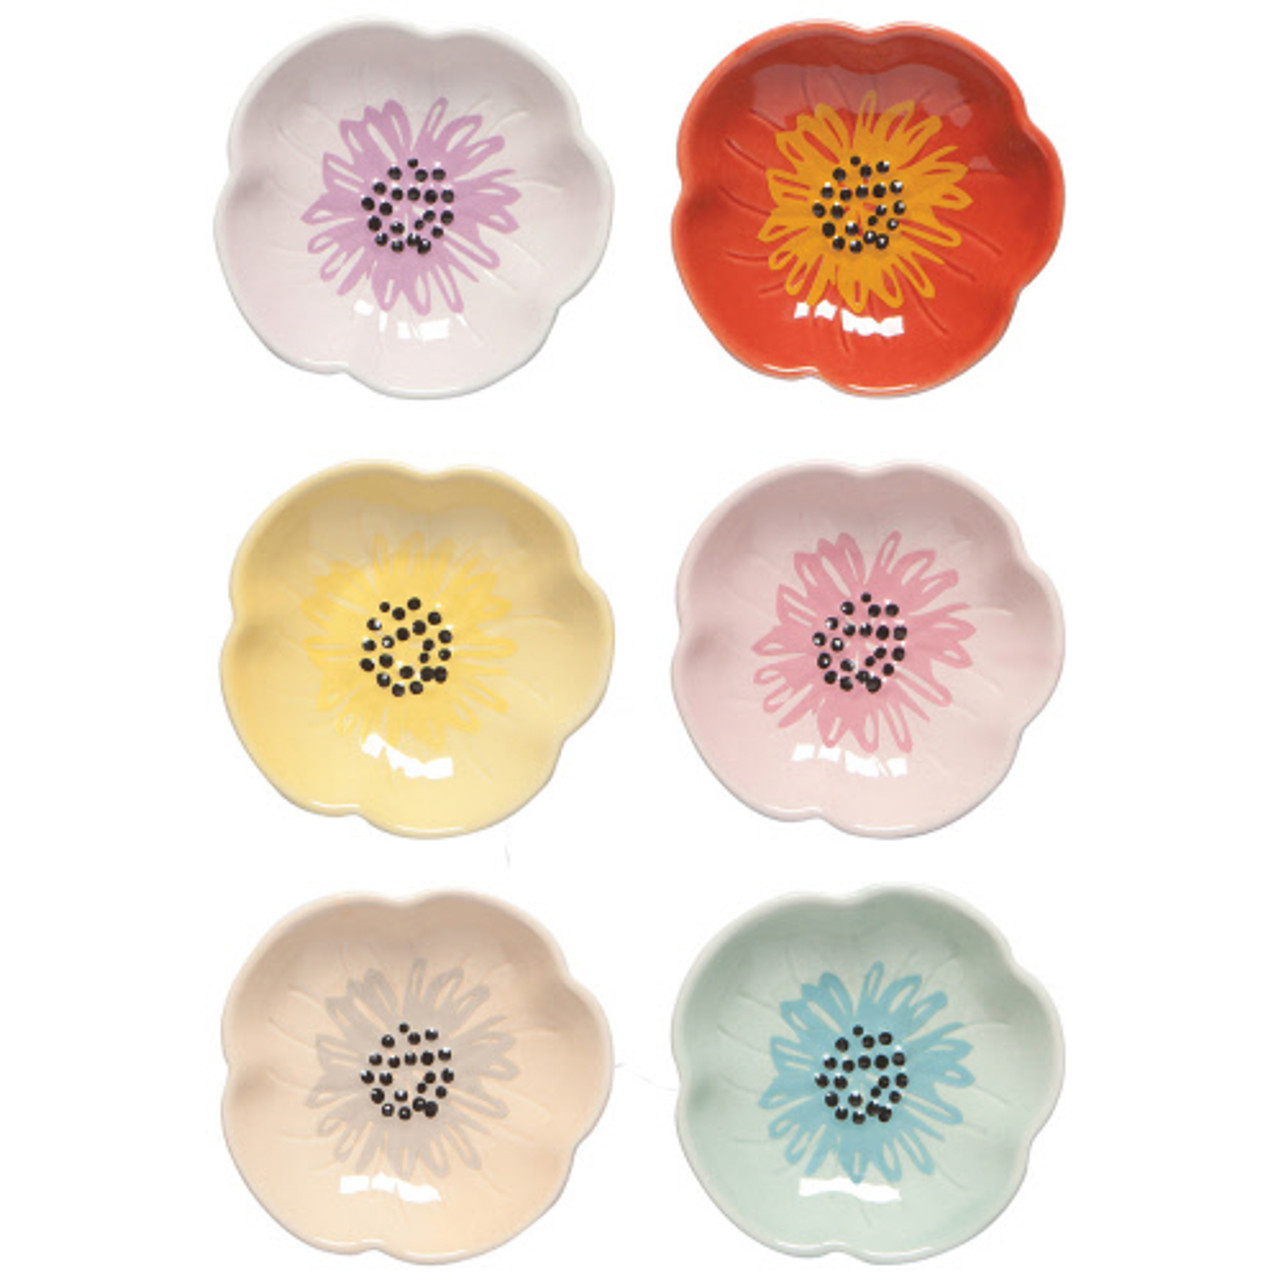 Butterfly-Shaped Pinch Bowl Set - For Small Hands